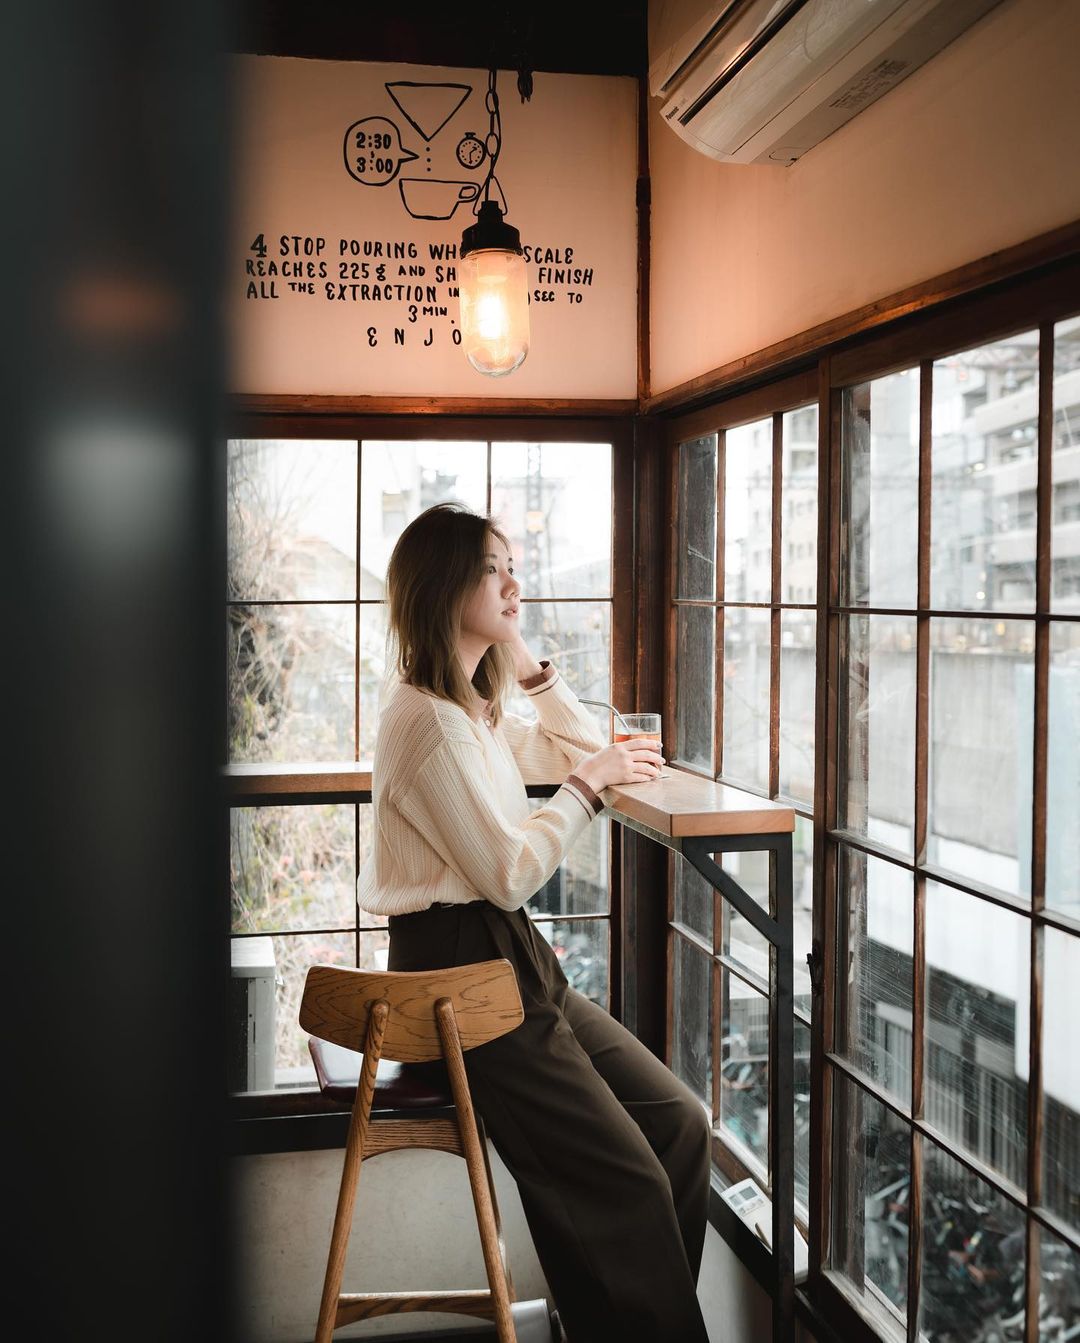 There's A Cafe In Japan Solely Dedicated For When A Strap Sits